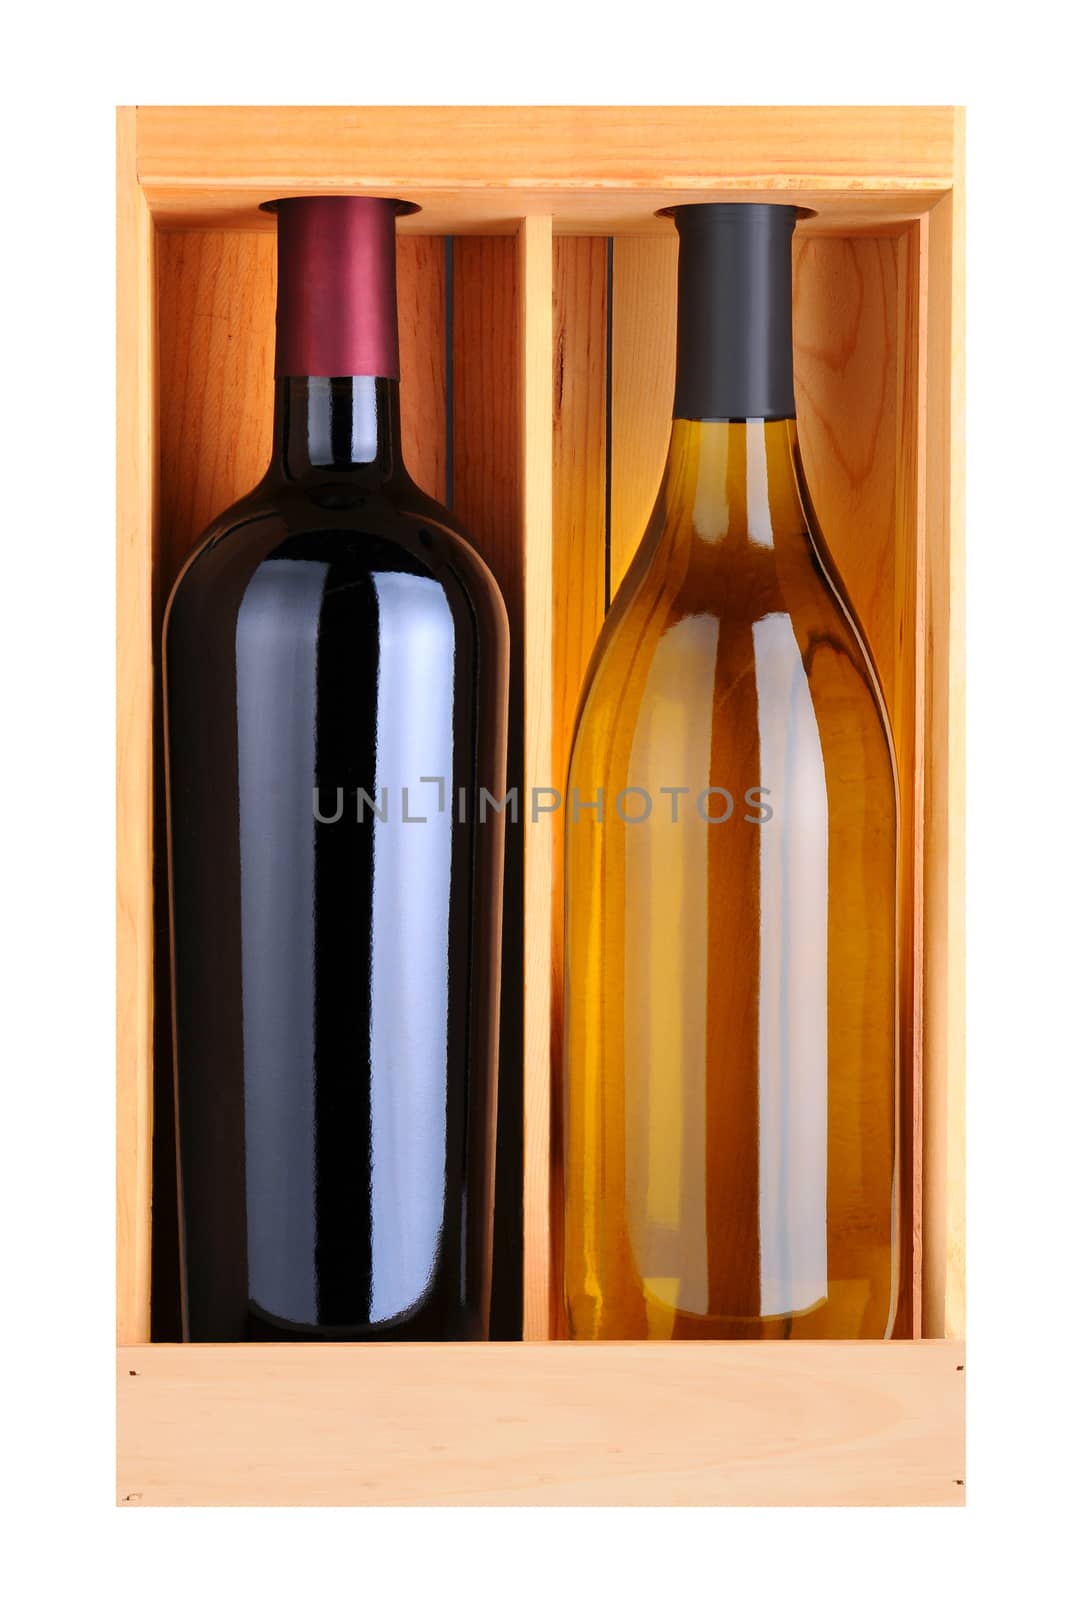 Cabernet and Chardonnay Bottles in Wood Box by sCukrov